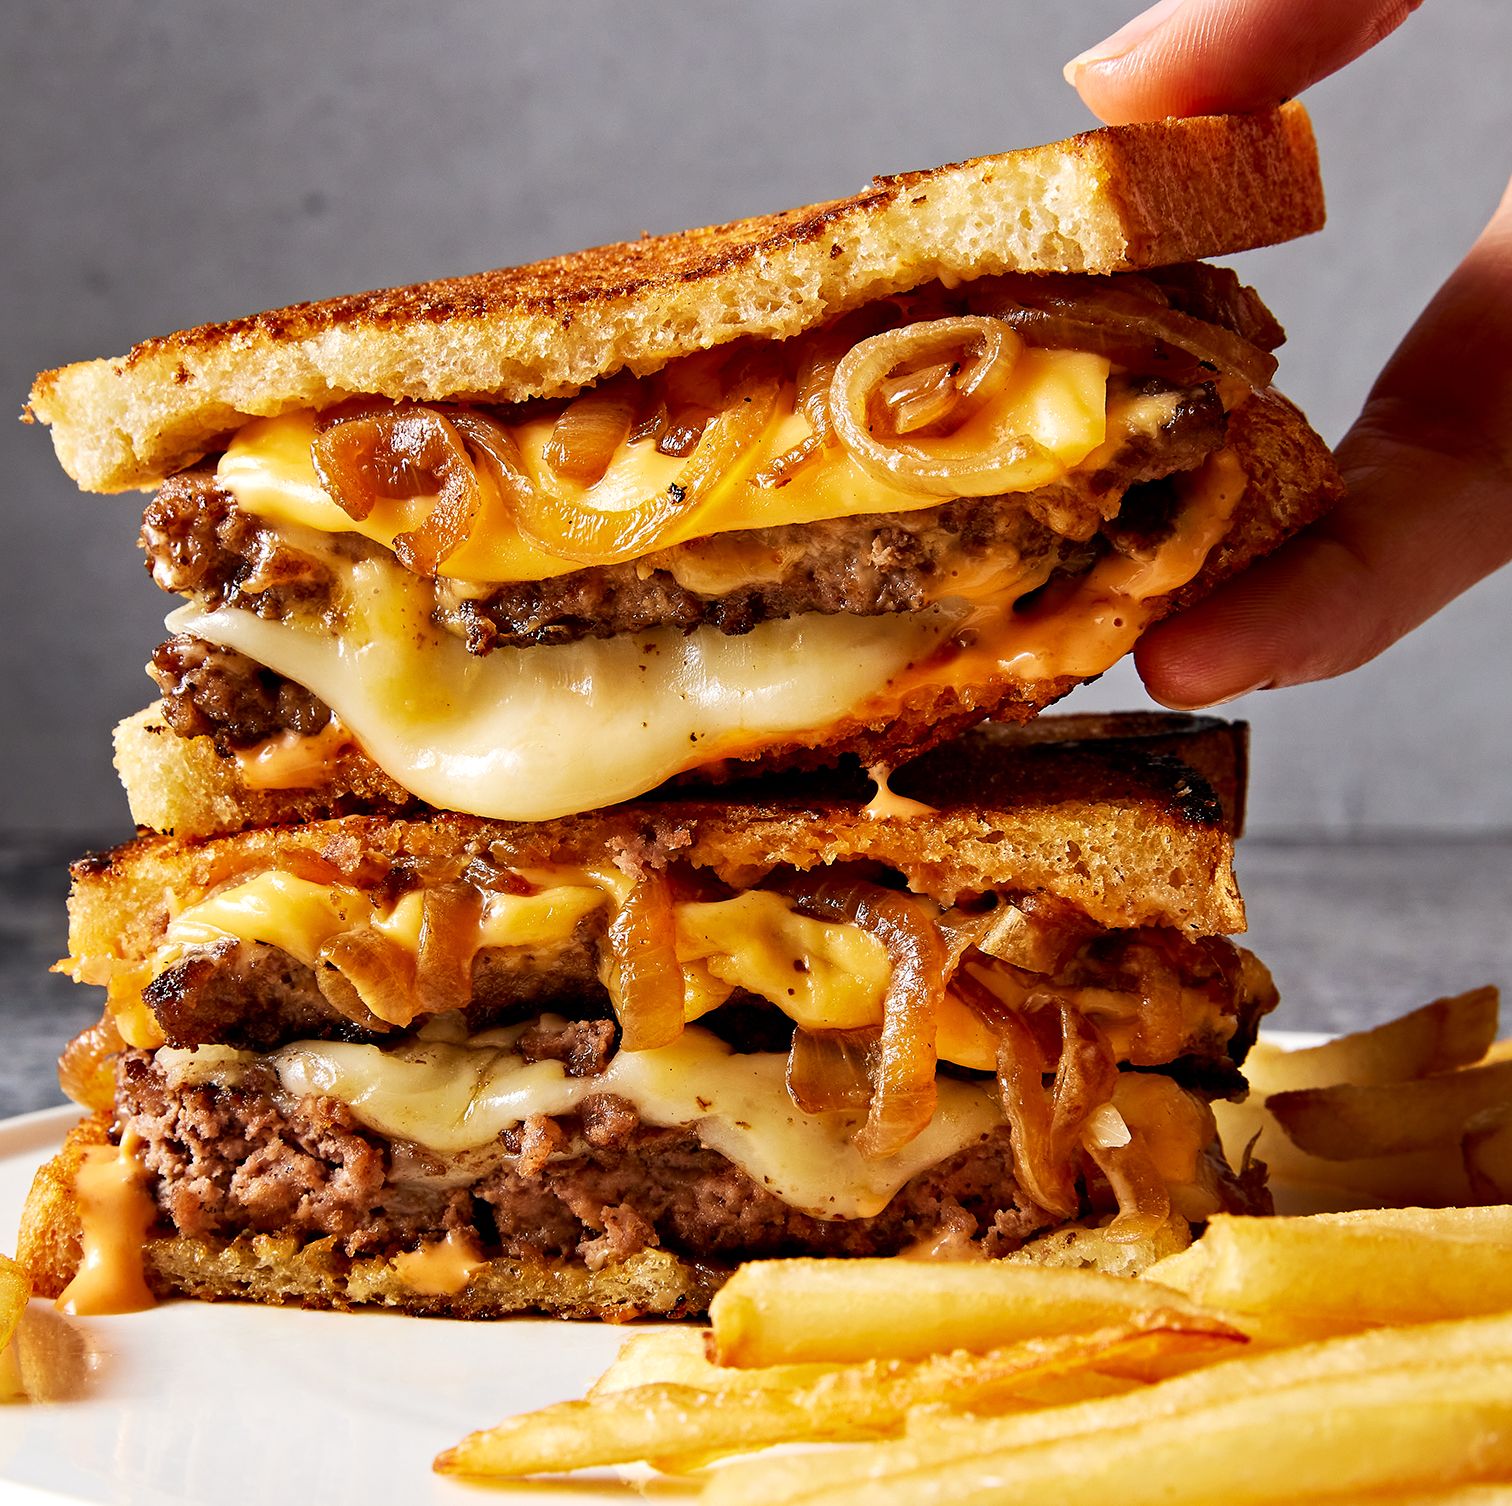 Our Copycat Steak ´N Shake Frisco Melt Just Might Be Better Than The Original